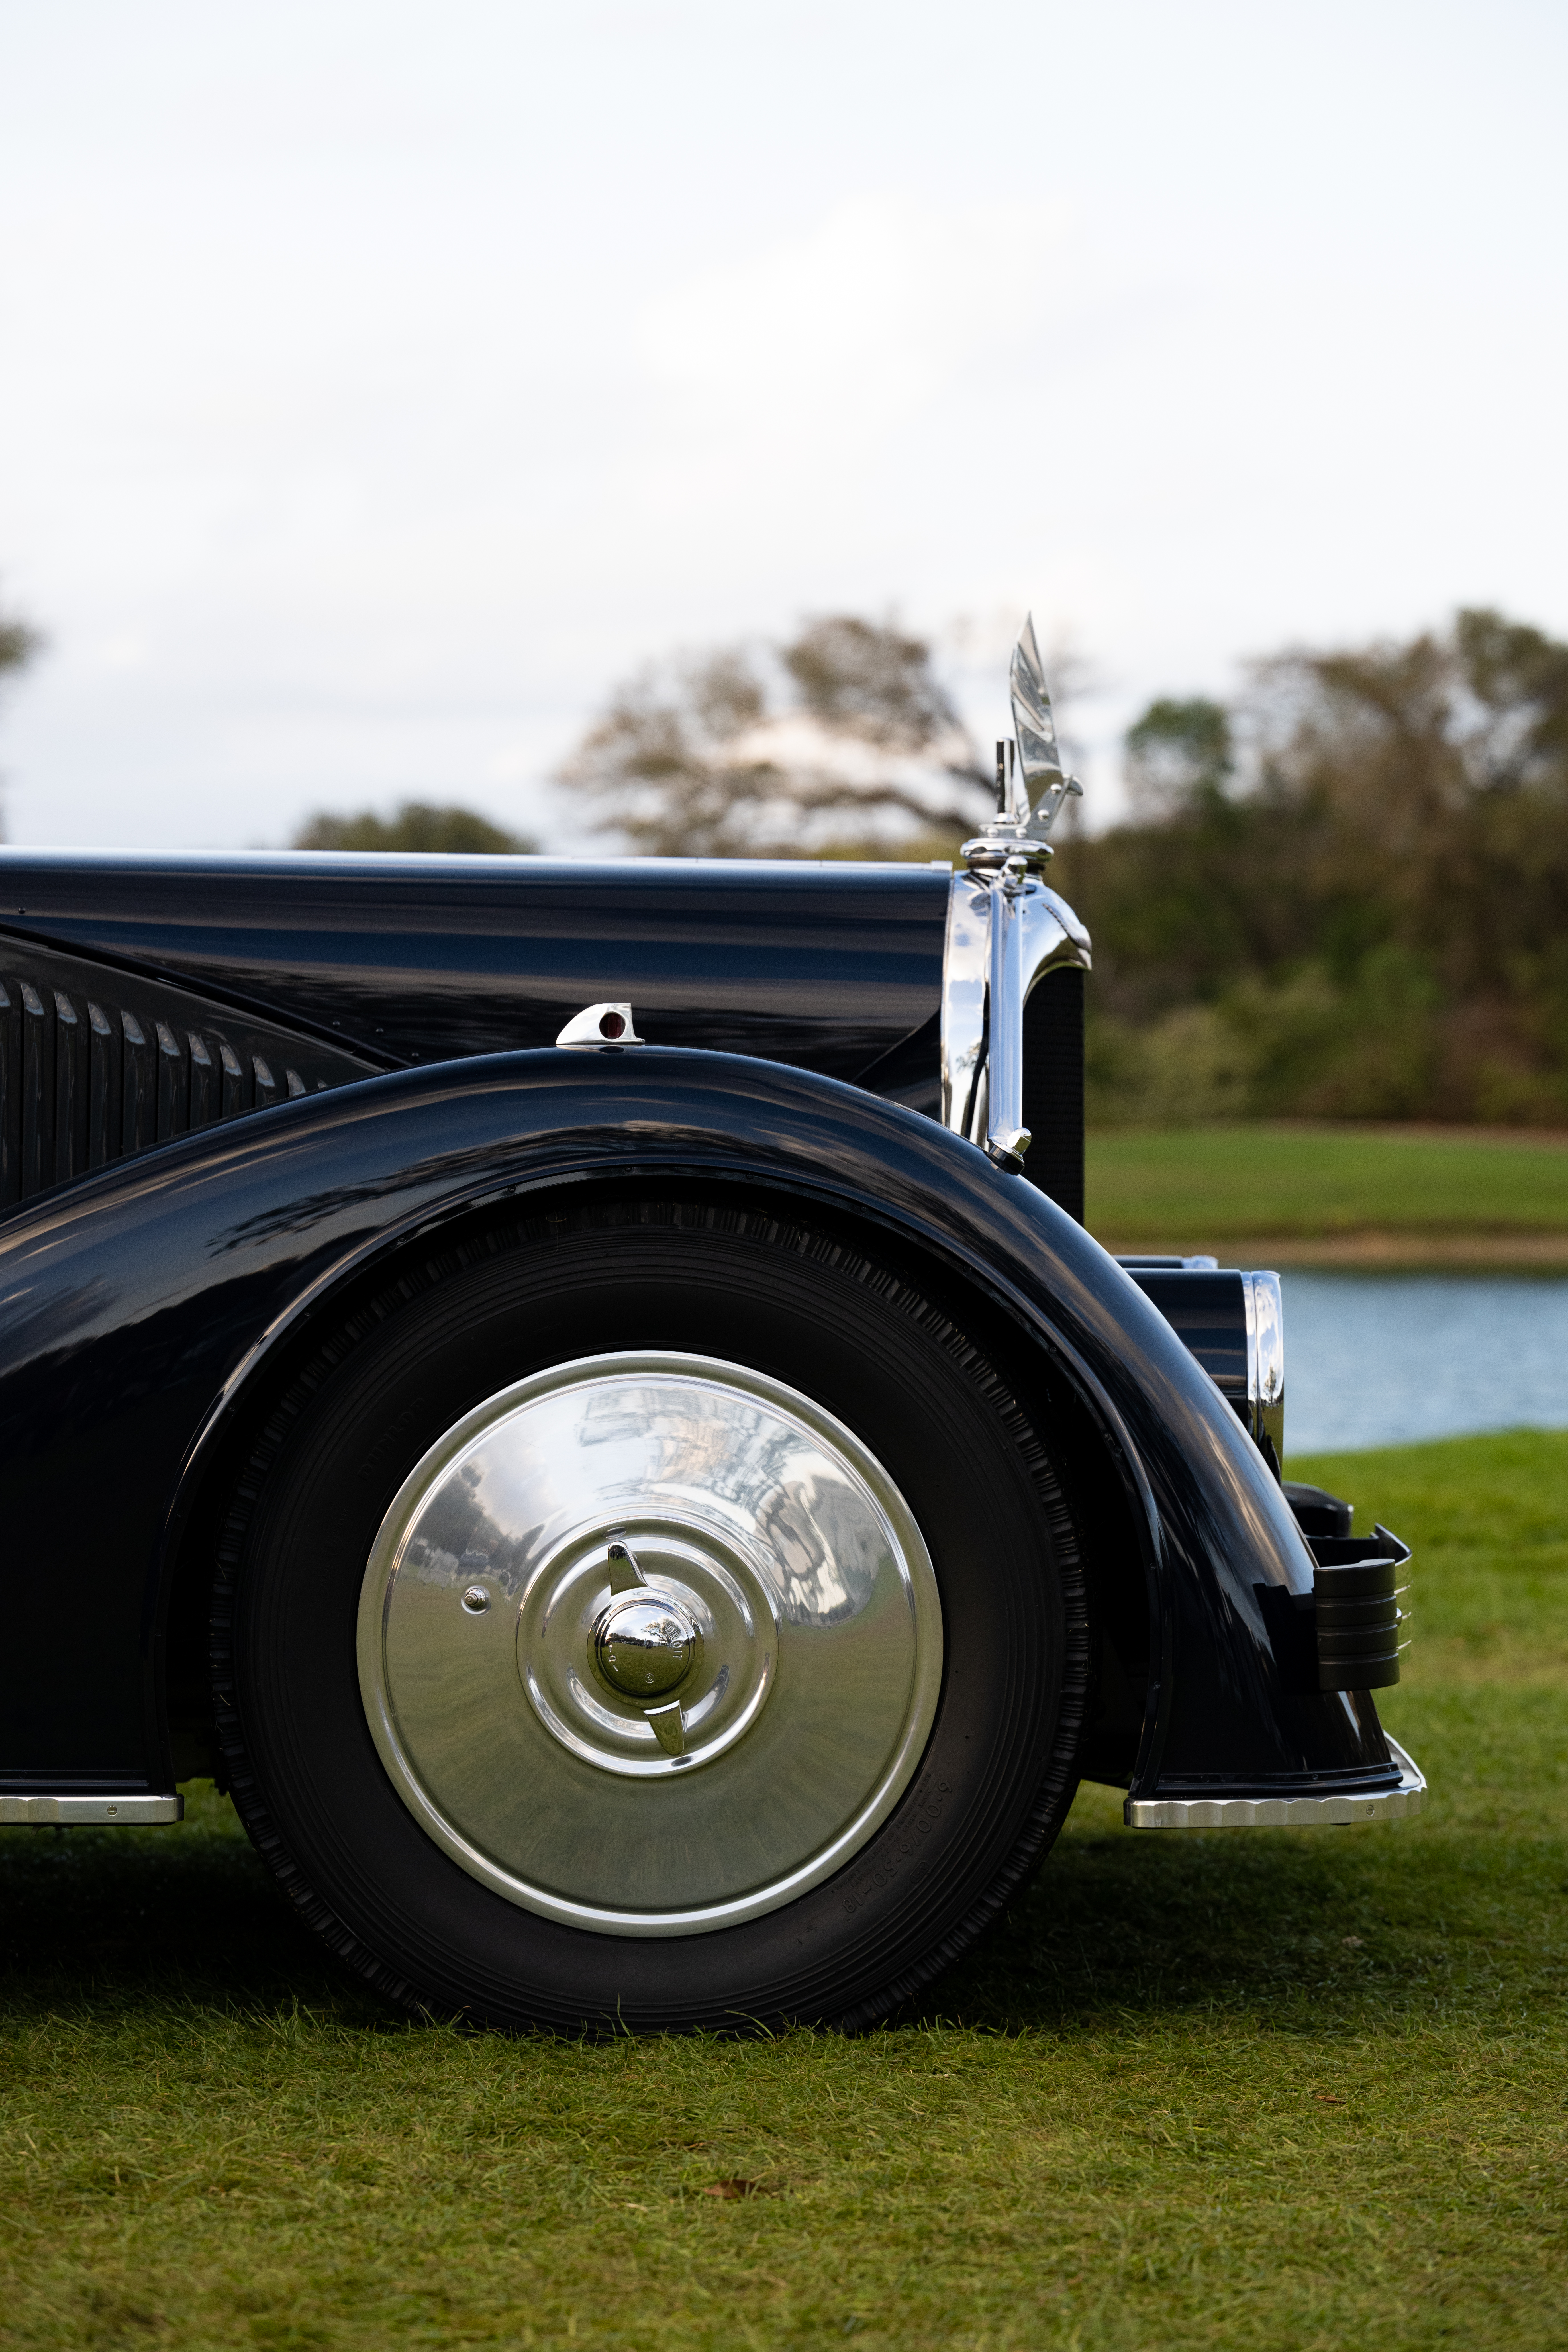 28th Annual Amelia Concours d'Elegance